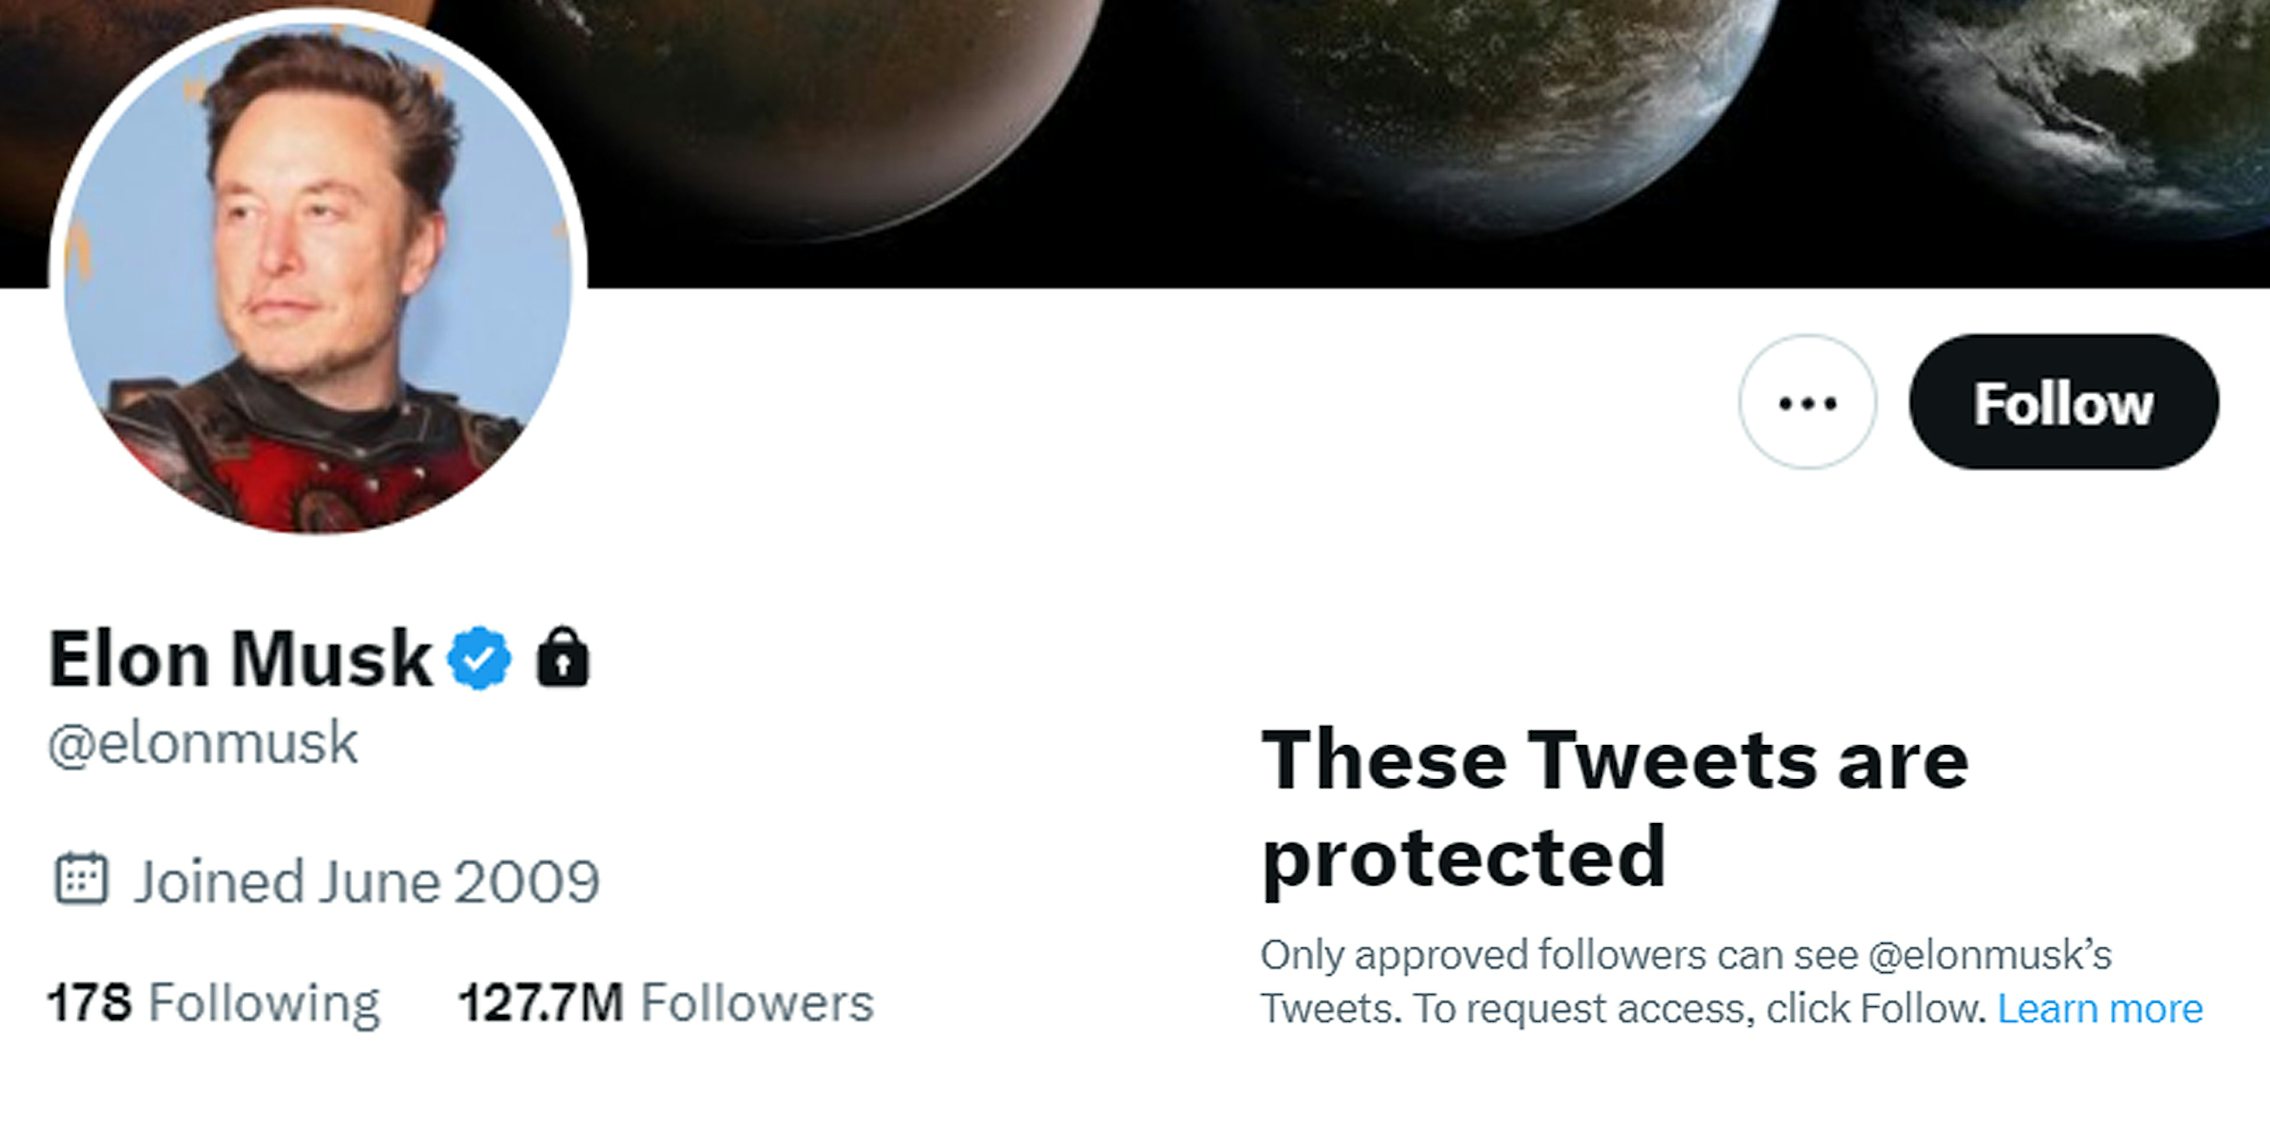 Elon Musk Twitter account 'These Tweets are protected'